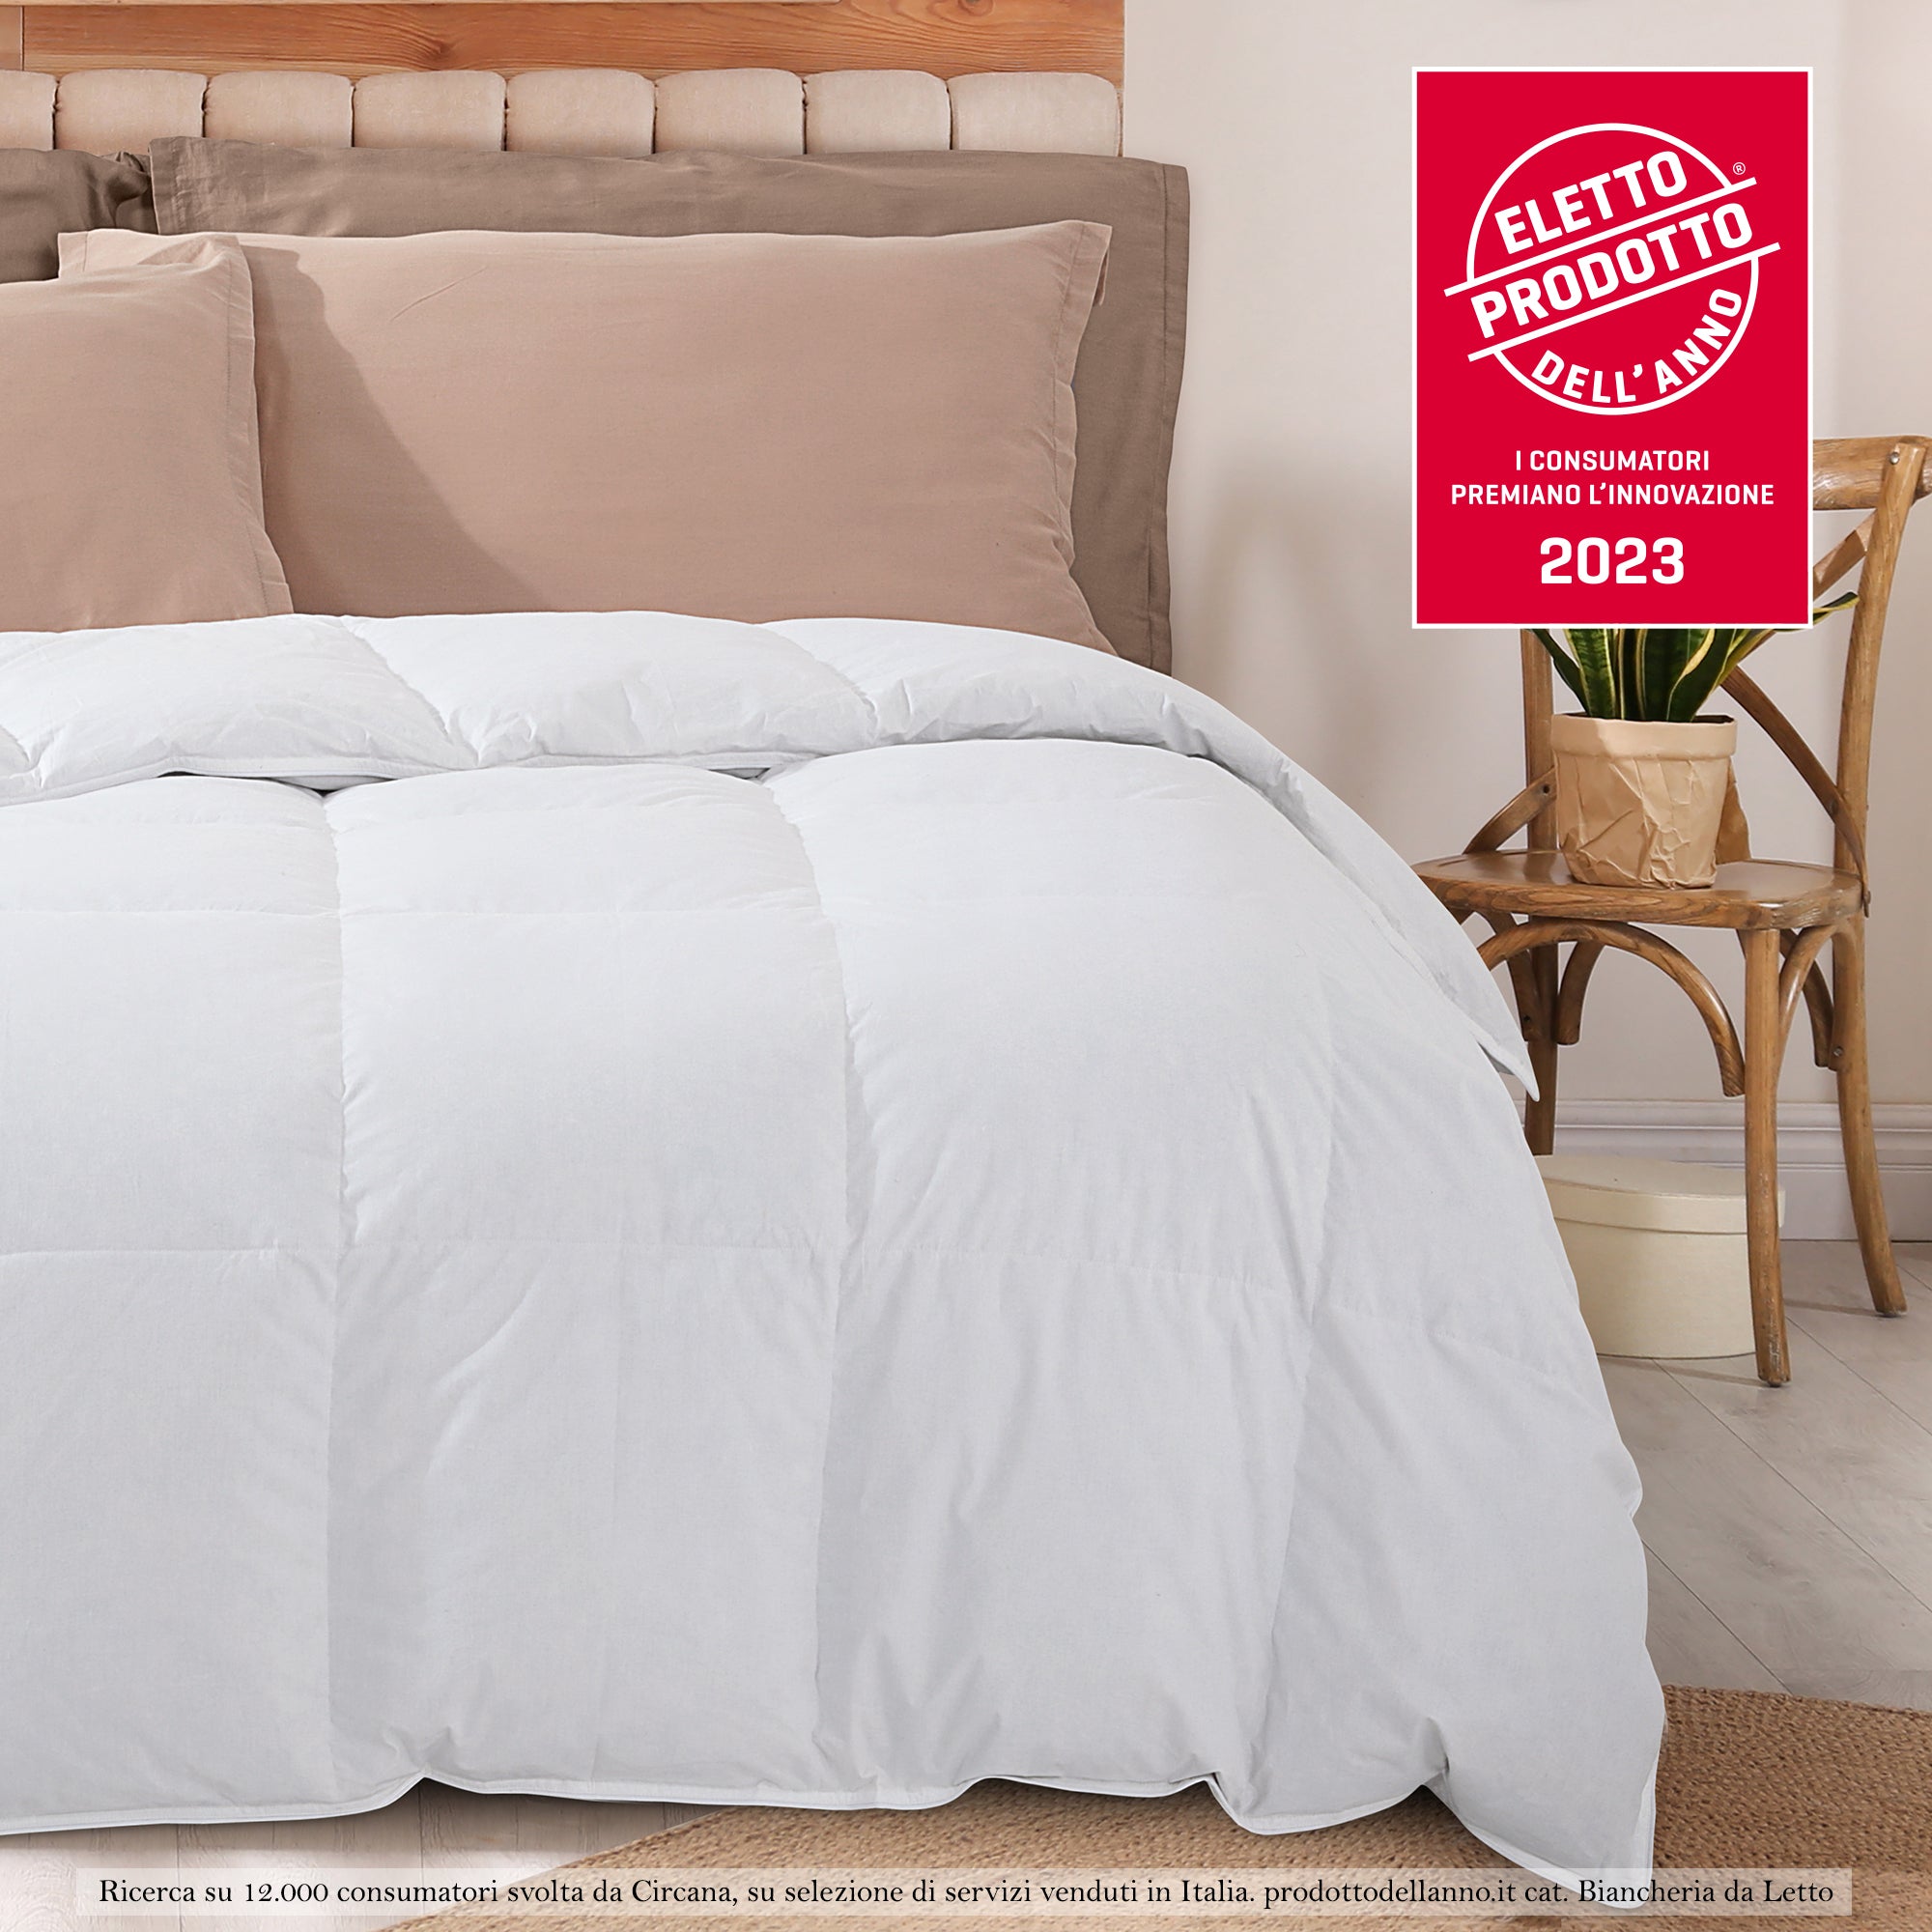 Polar 5* Winter Down duvet in 100% Goose Down | Elected Product of the Year 2023